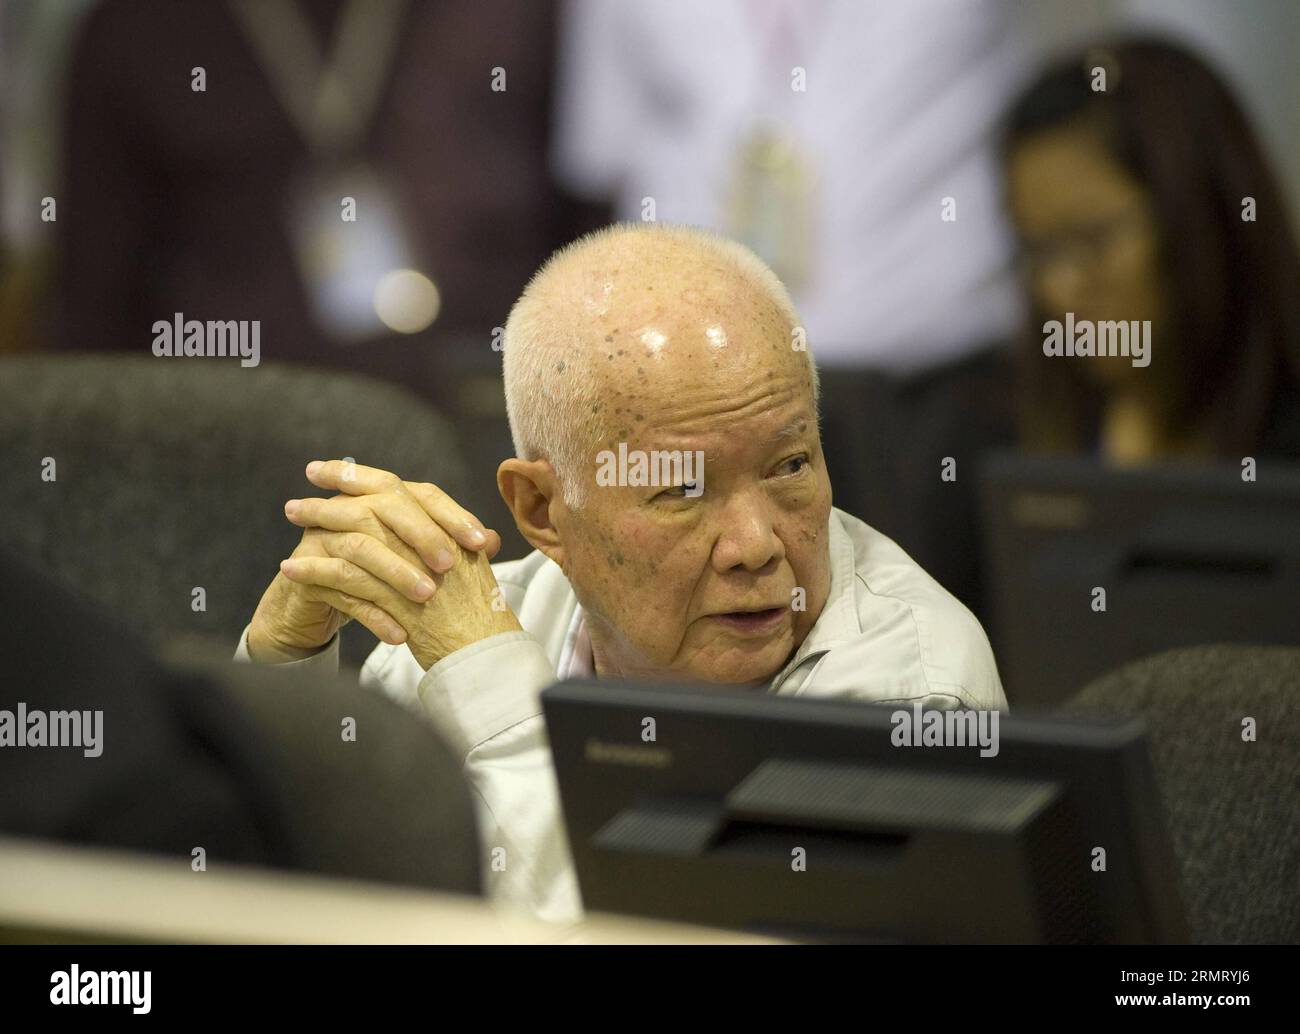 (140807) -- PHNOM PENH, Aug. 7, 2014 -- Khieu Samphan, 83, former head of state of the Democratic Kampuchea, known as Khmer Rouge regime, appears in the courtroom in Phnom Penh, Cambodia, Aug. 7, 2014. The United Nations war crimes tribunal convicted two aging former top leaders of the Democratic Kampuchea, also known as Khmer Rouge, of atrocity crimes against humanity and sentenced them to life in prison, according to a verdict pronounced by the tribunal s president Nil Nonn on Thursday. ) CAMBODIA-PHNOM PENH-VERDICT ECCC PUBLICATIONxNOTxINxCHN   Phnom Penh Aug 7 2014 Khieu Samphan 83 Former Stock Photo